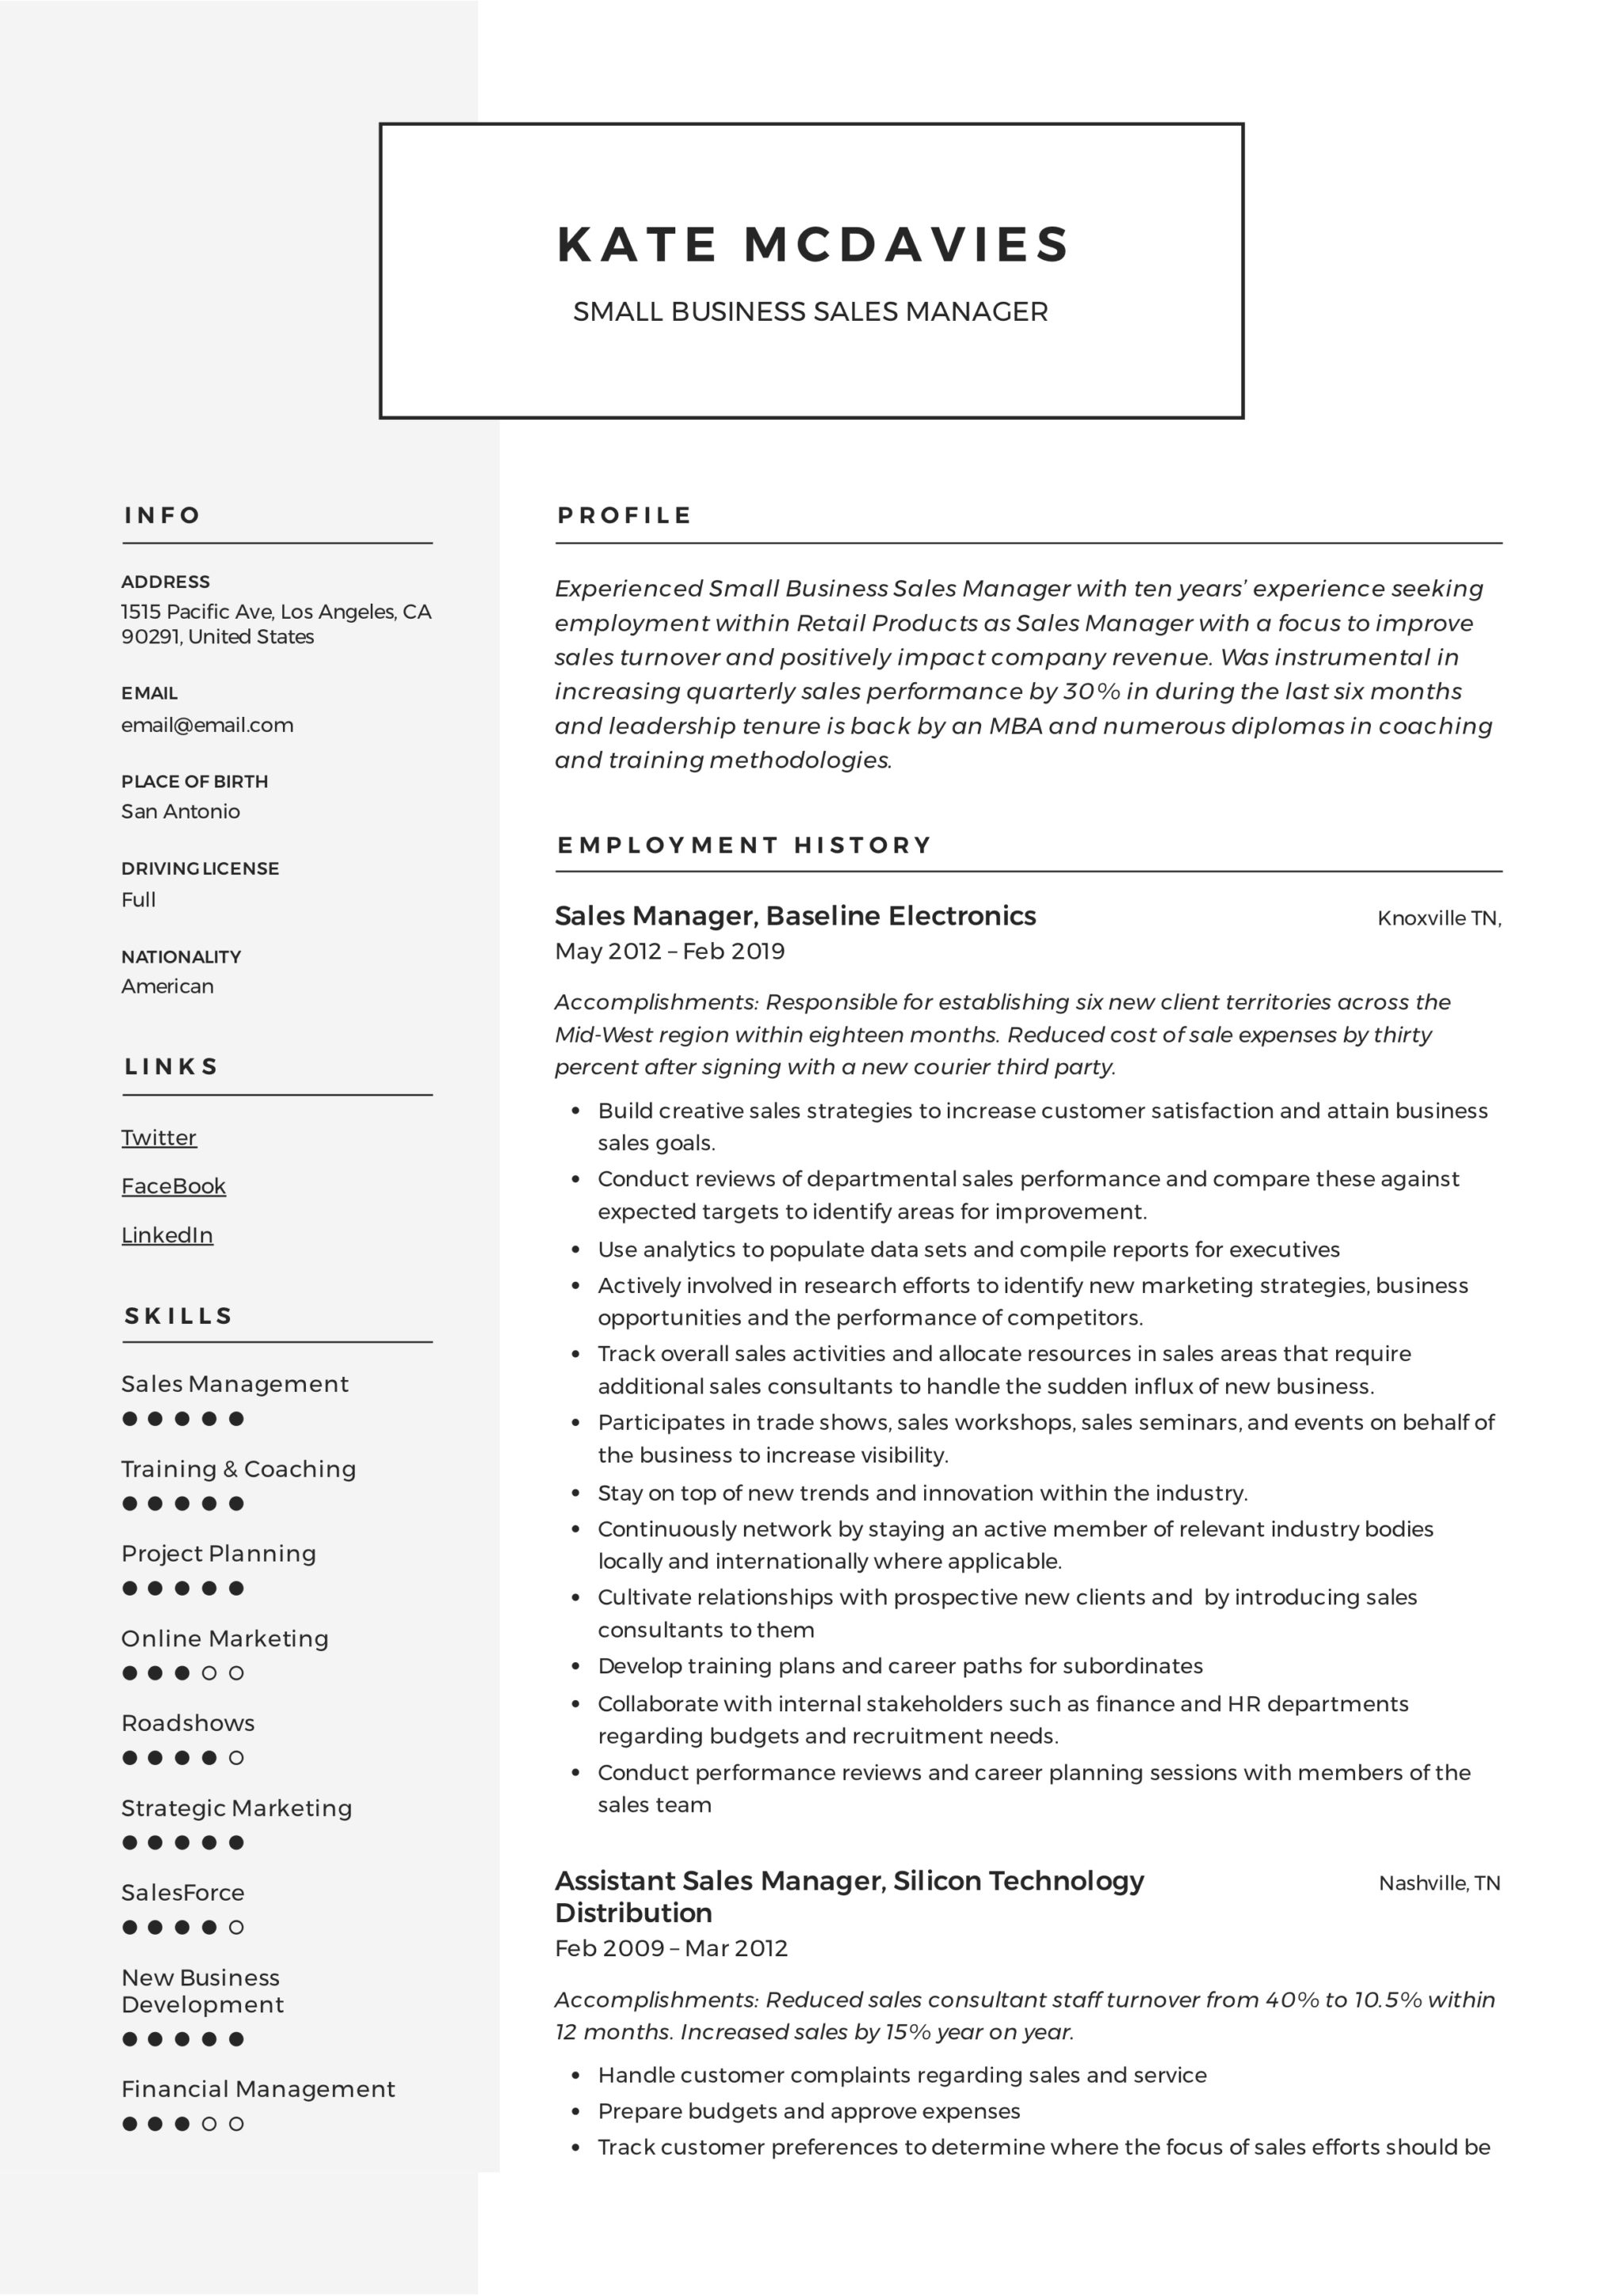 guide  small business sales manager resume  x12  sample